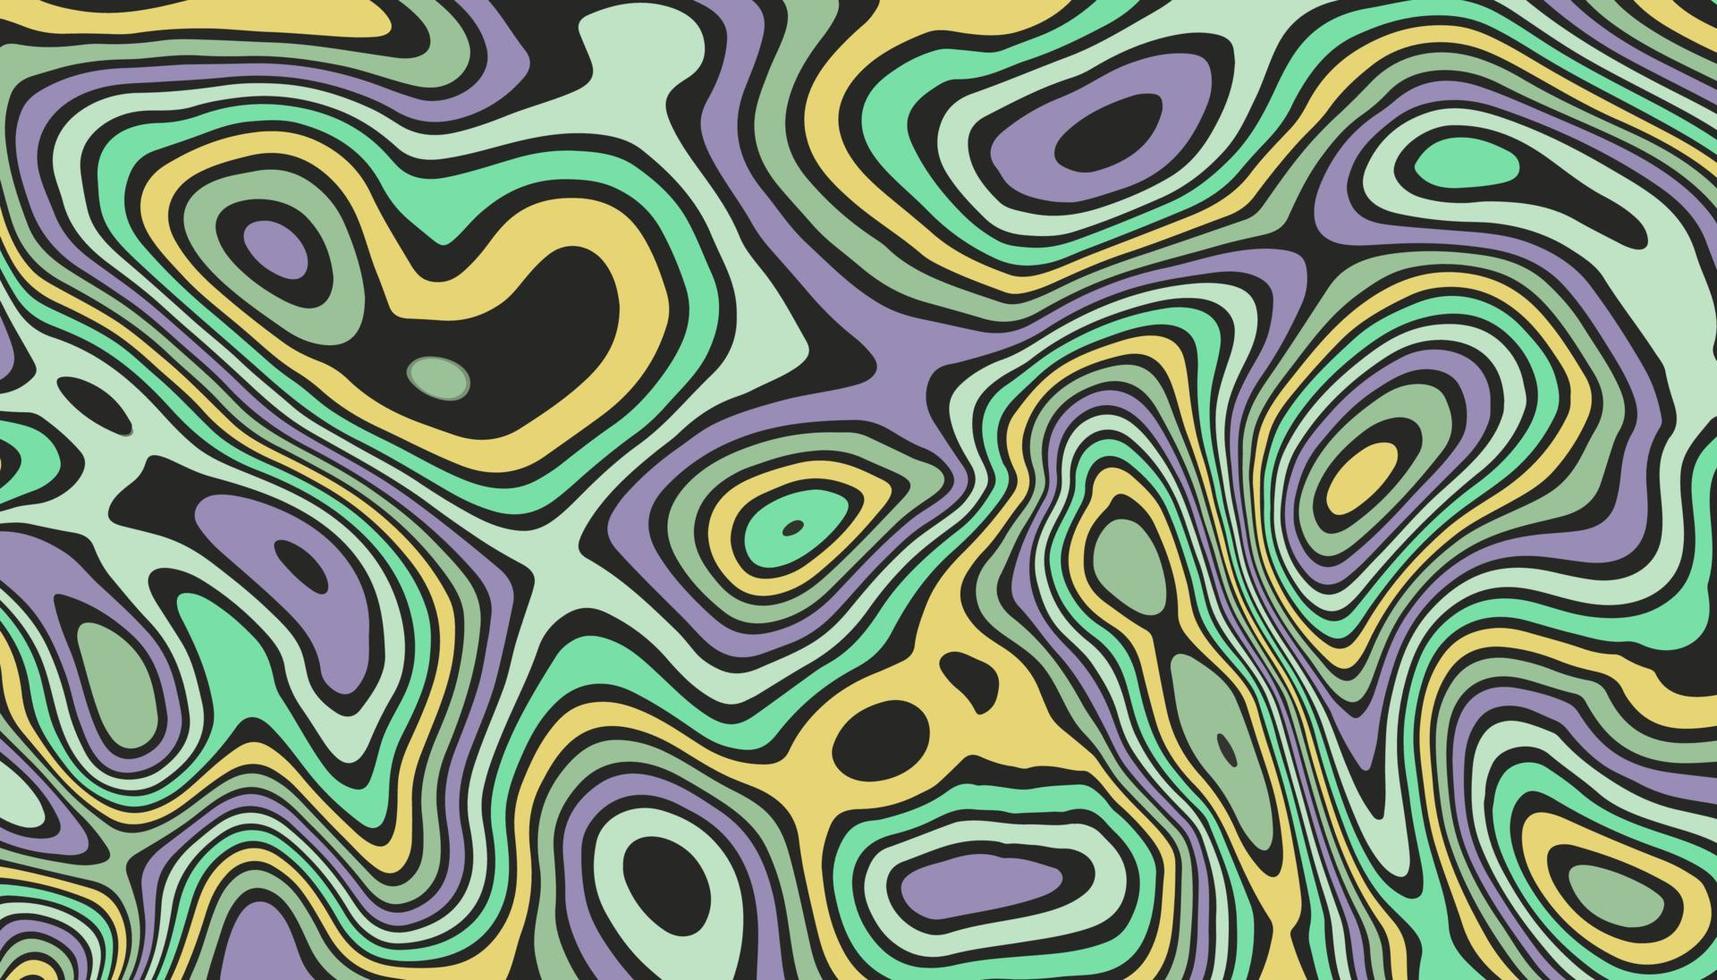 Abstract horizontal background with colorful waves. Psychedelic style, Trendy vector illustration in style retro 60s, 70s.